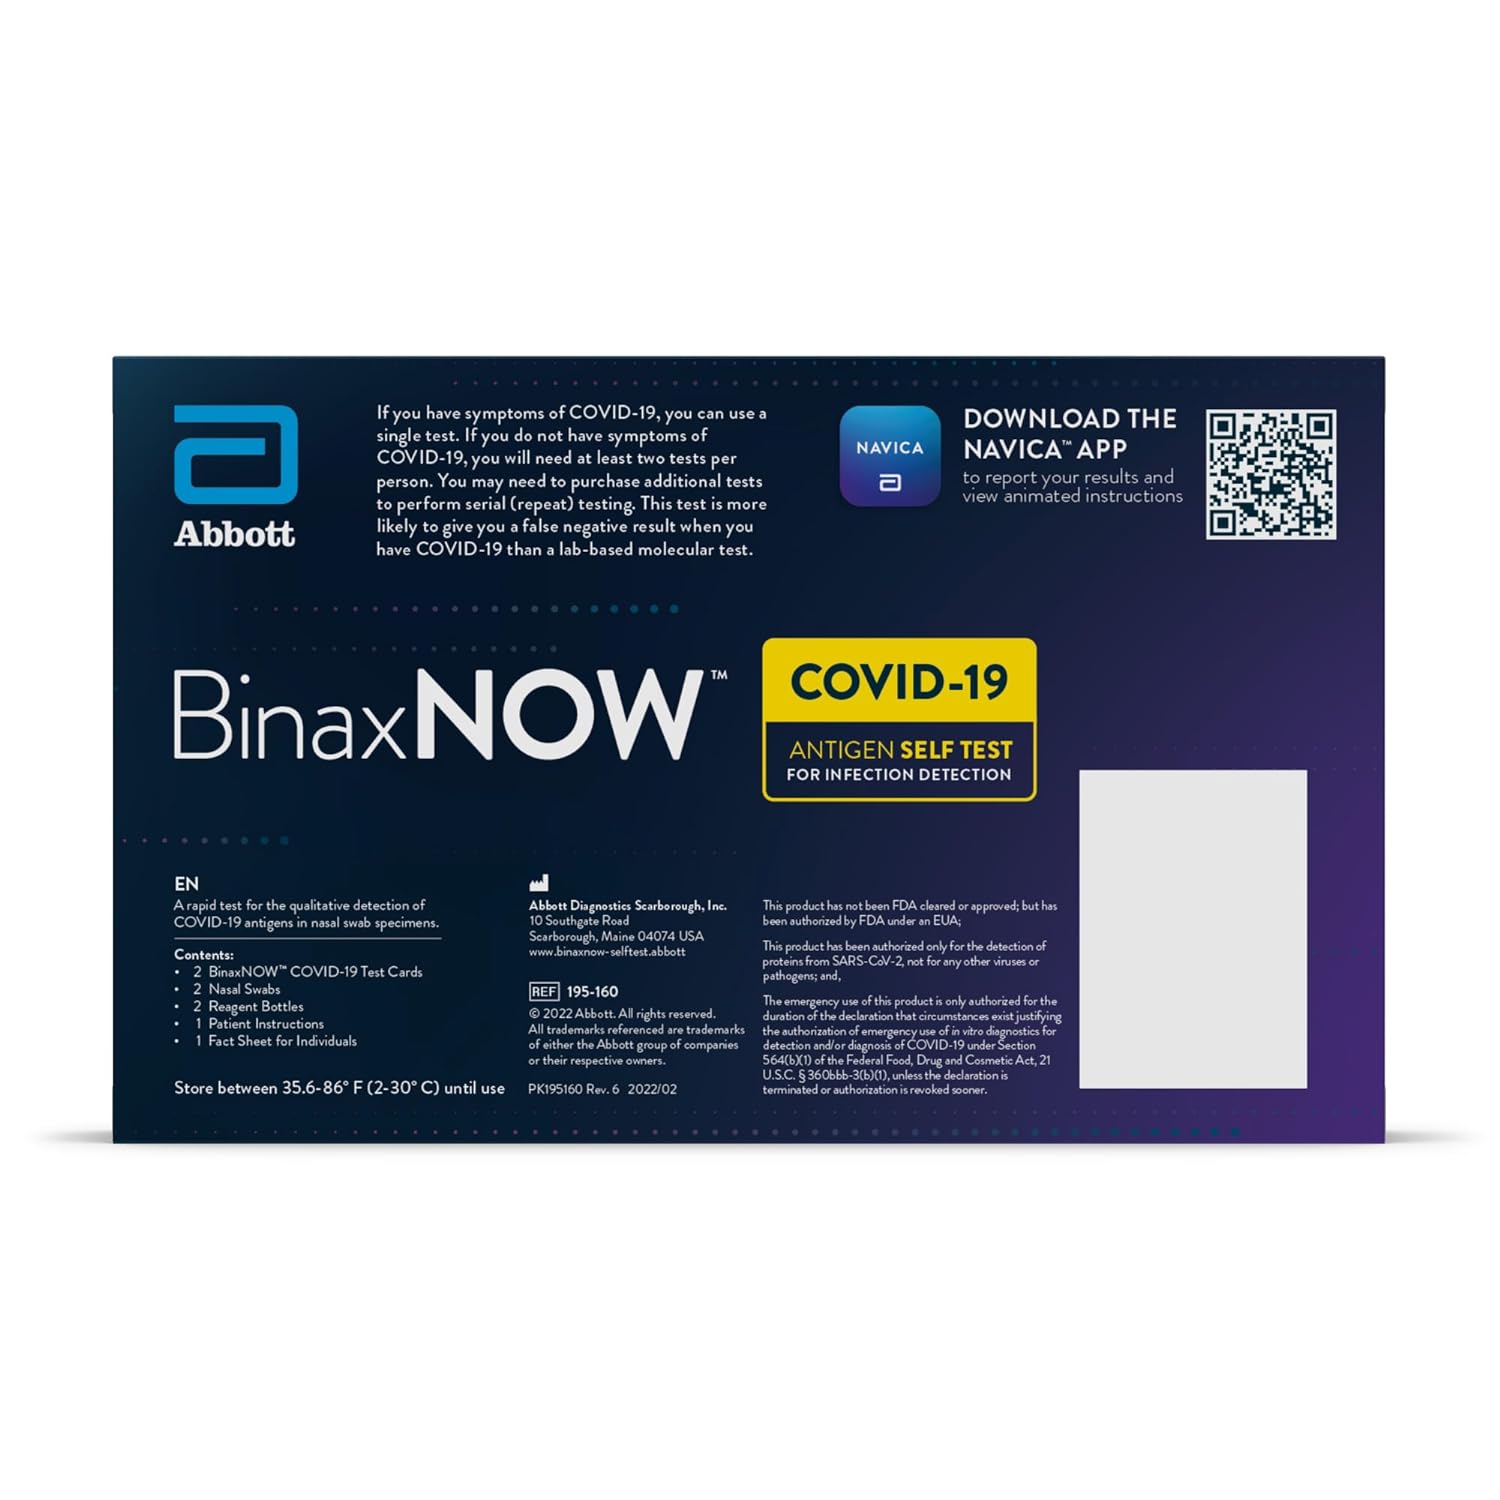 BinaxNOW COVID‐19 Antigen Self Test, 1 Pack, Double, 2-count, At Home COVID-19 Test, 2 Tests - image 11 of 13